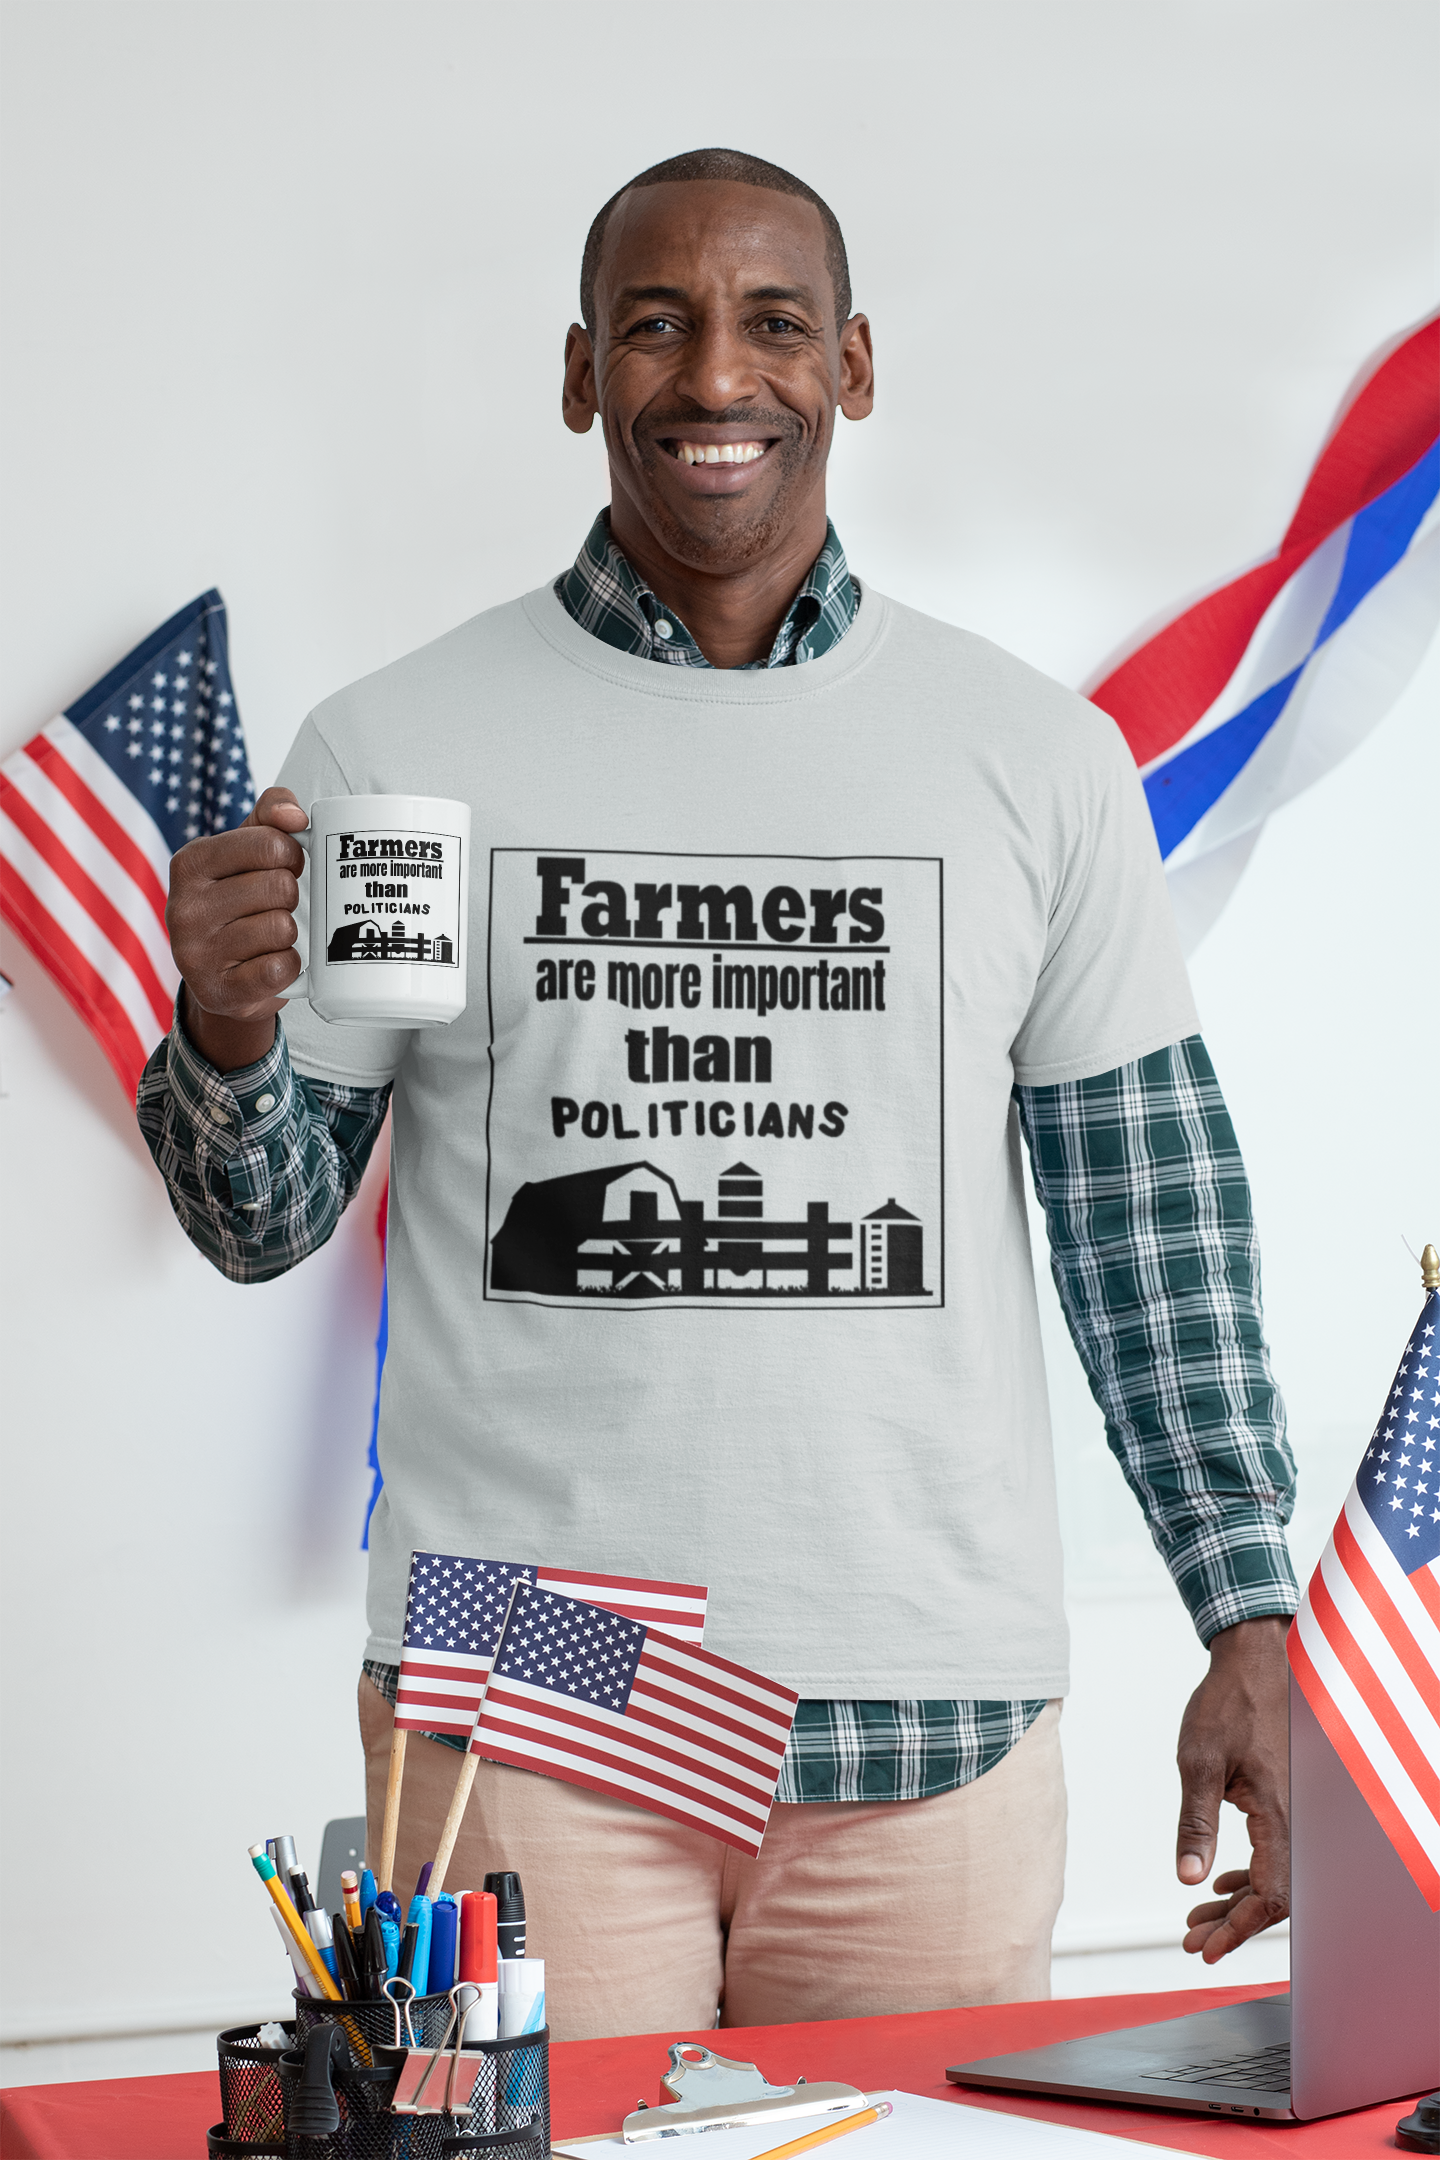 Farmers are more important than politicians unixex tshirt dads day gift gift for boyfriend gift for dad gift for grandpa gift for her gift for him gift for husband gift for mom gift for sister gift for wife gift idea moms gift mothers day gift school gift teacher gift Unique gift